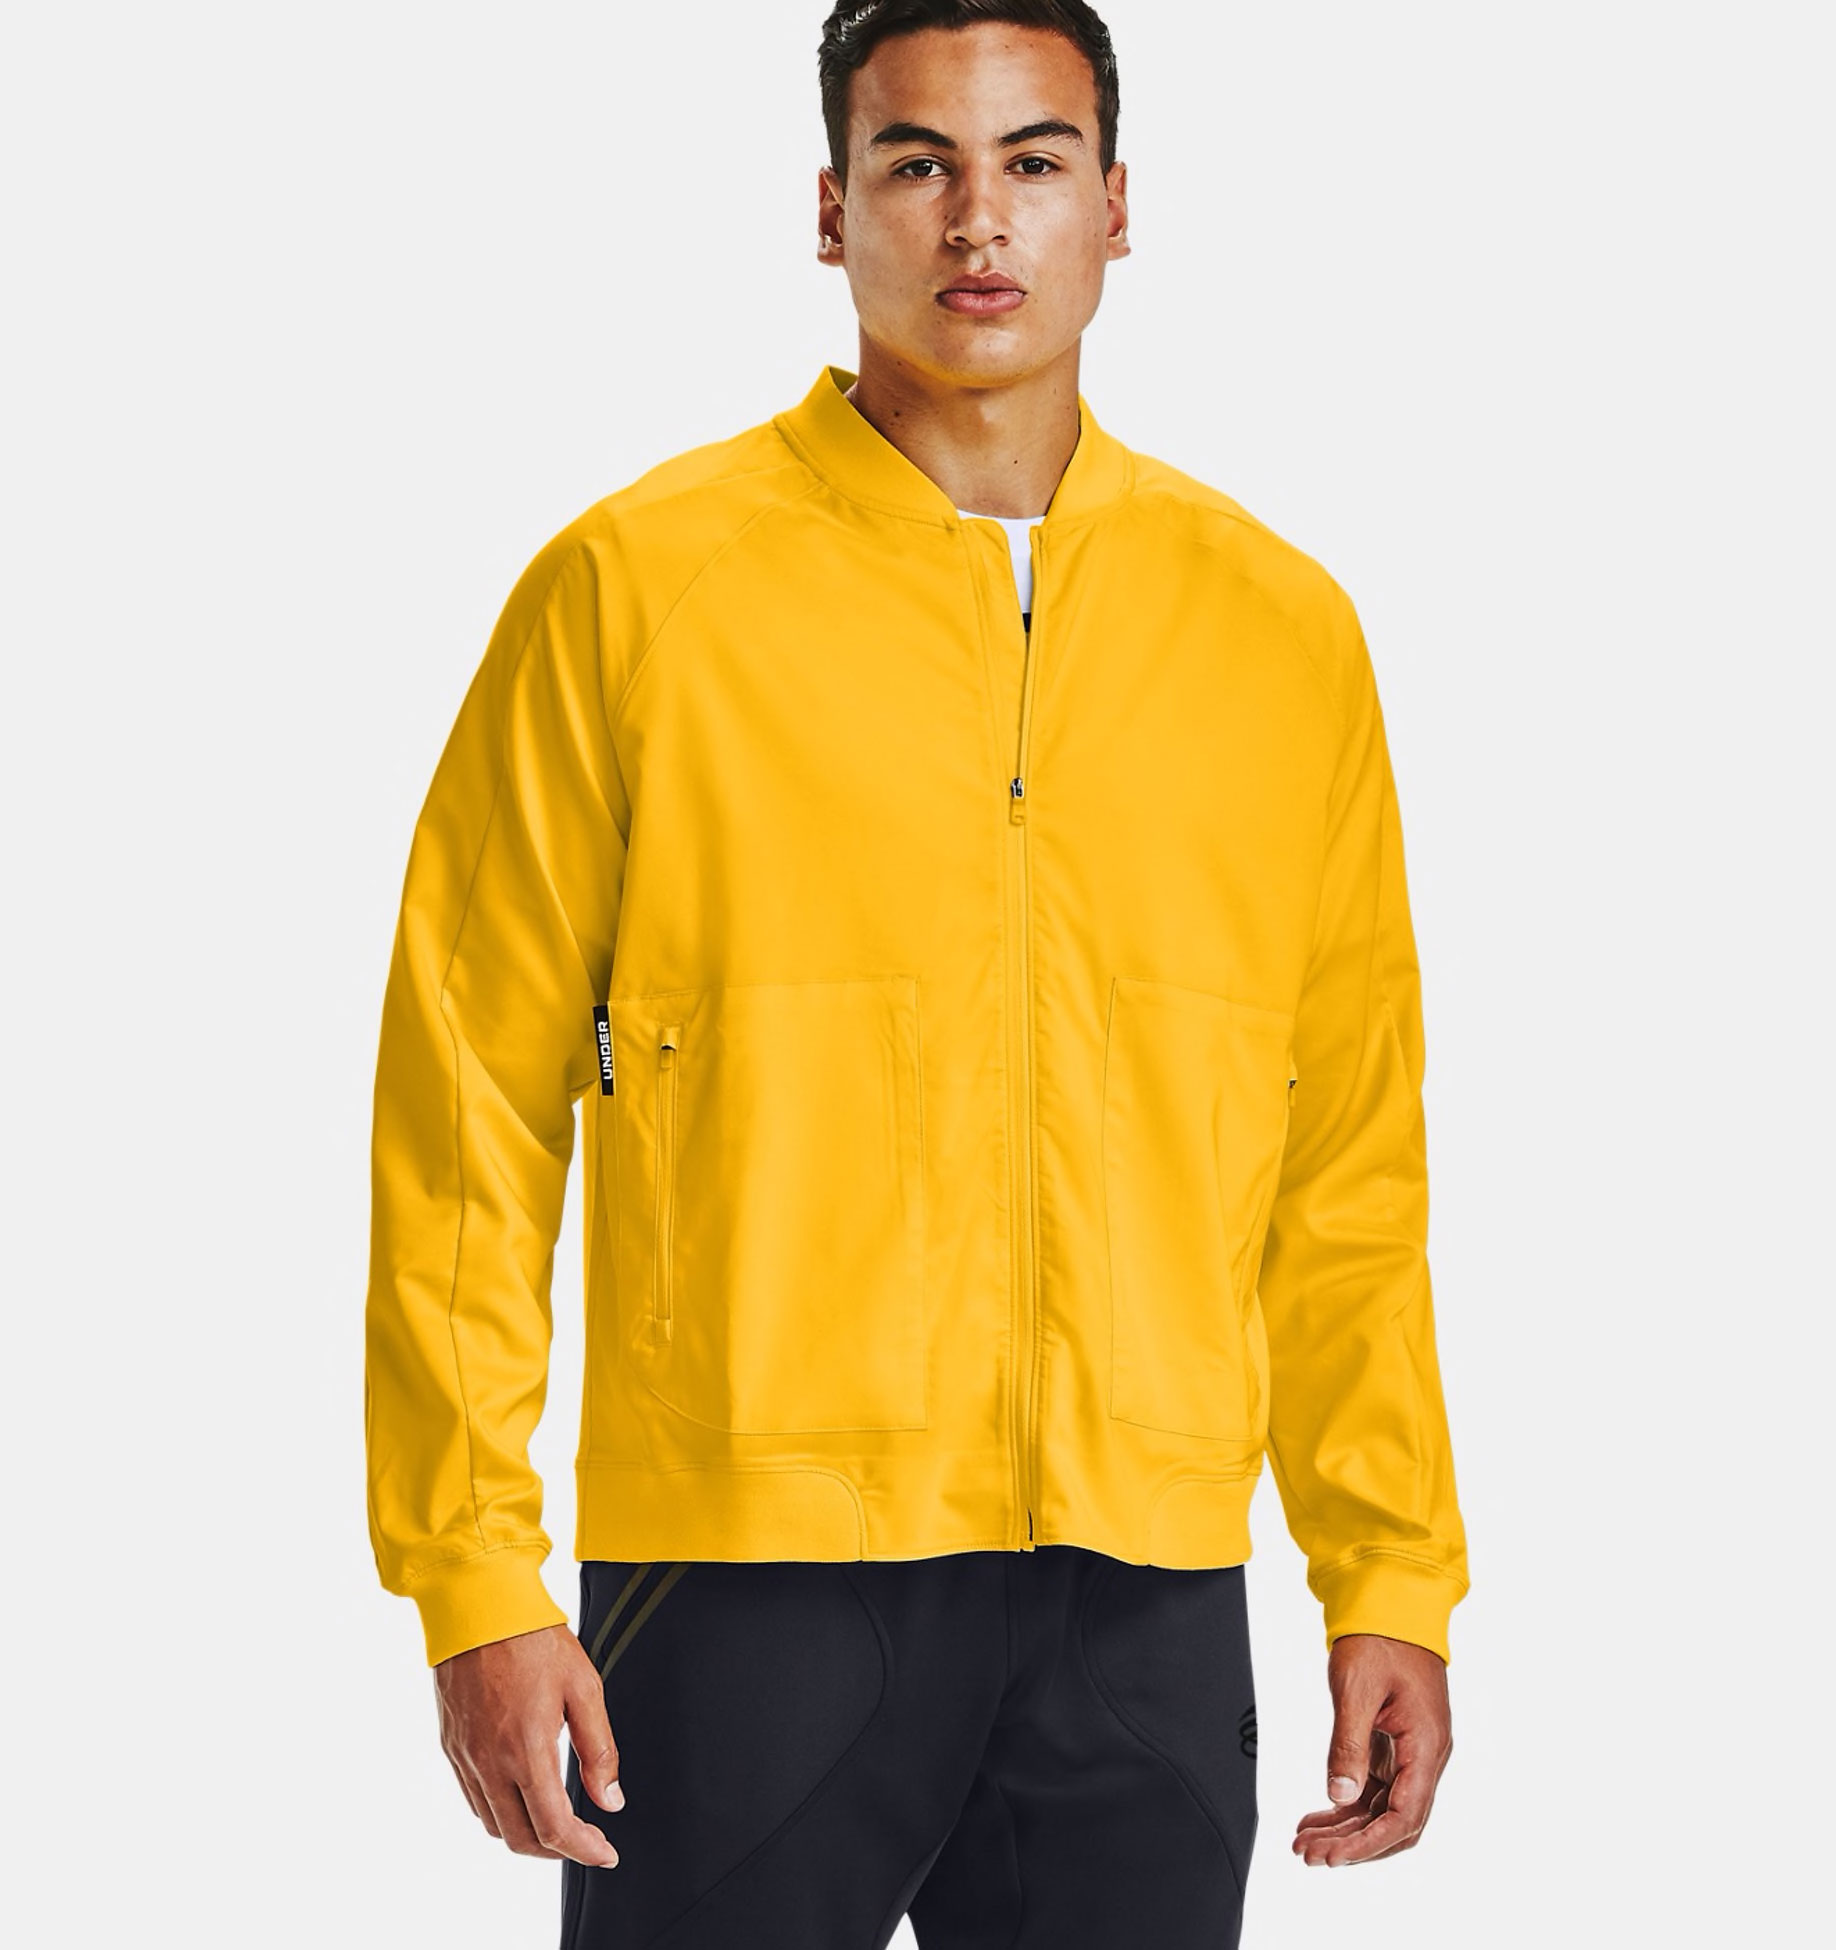 curry-8-jacket-gold-yellow-1